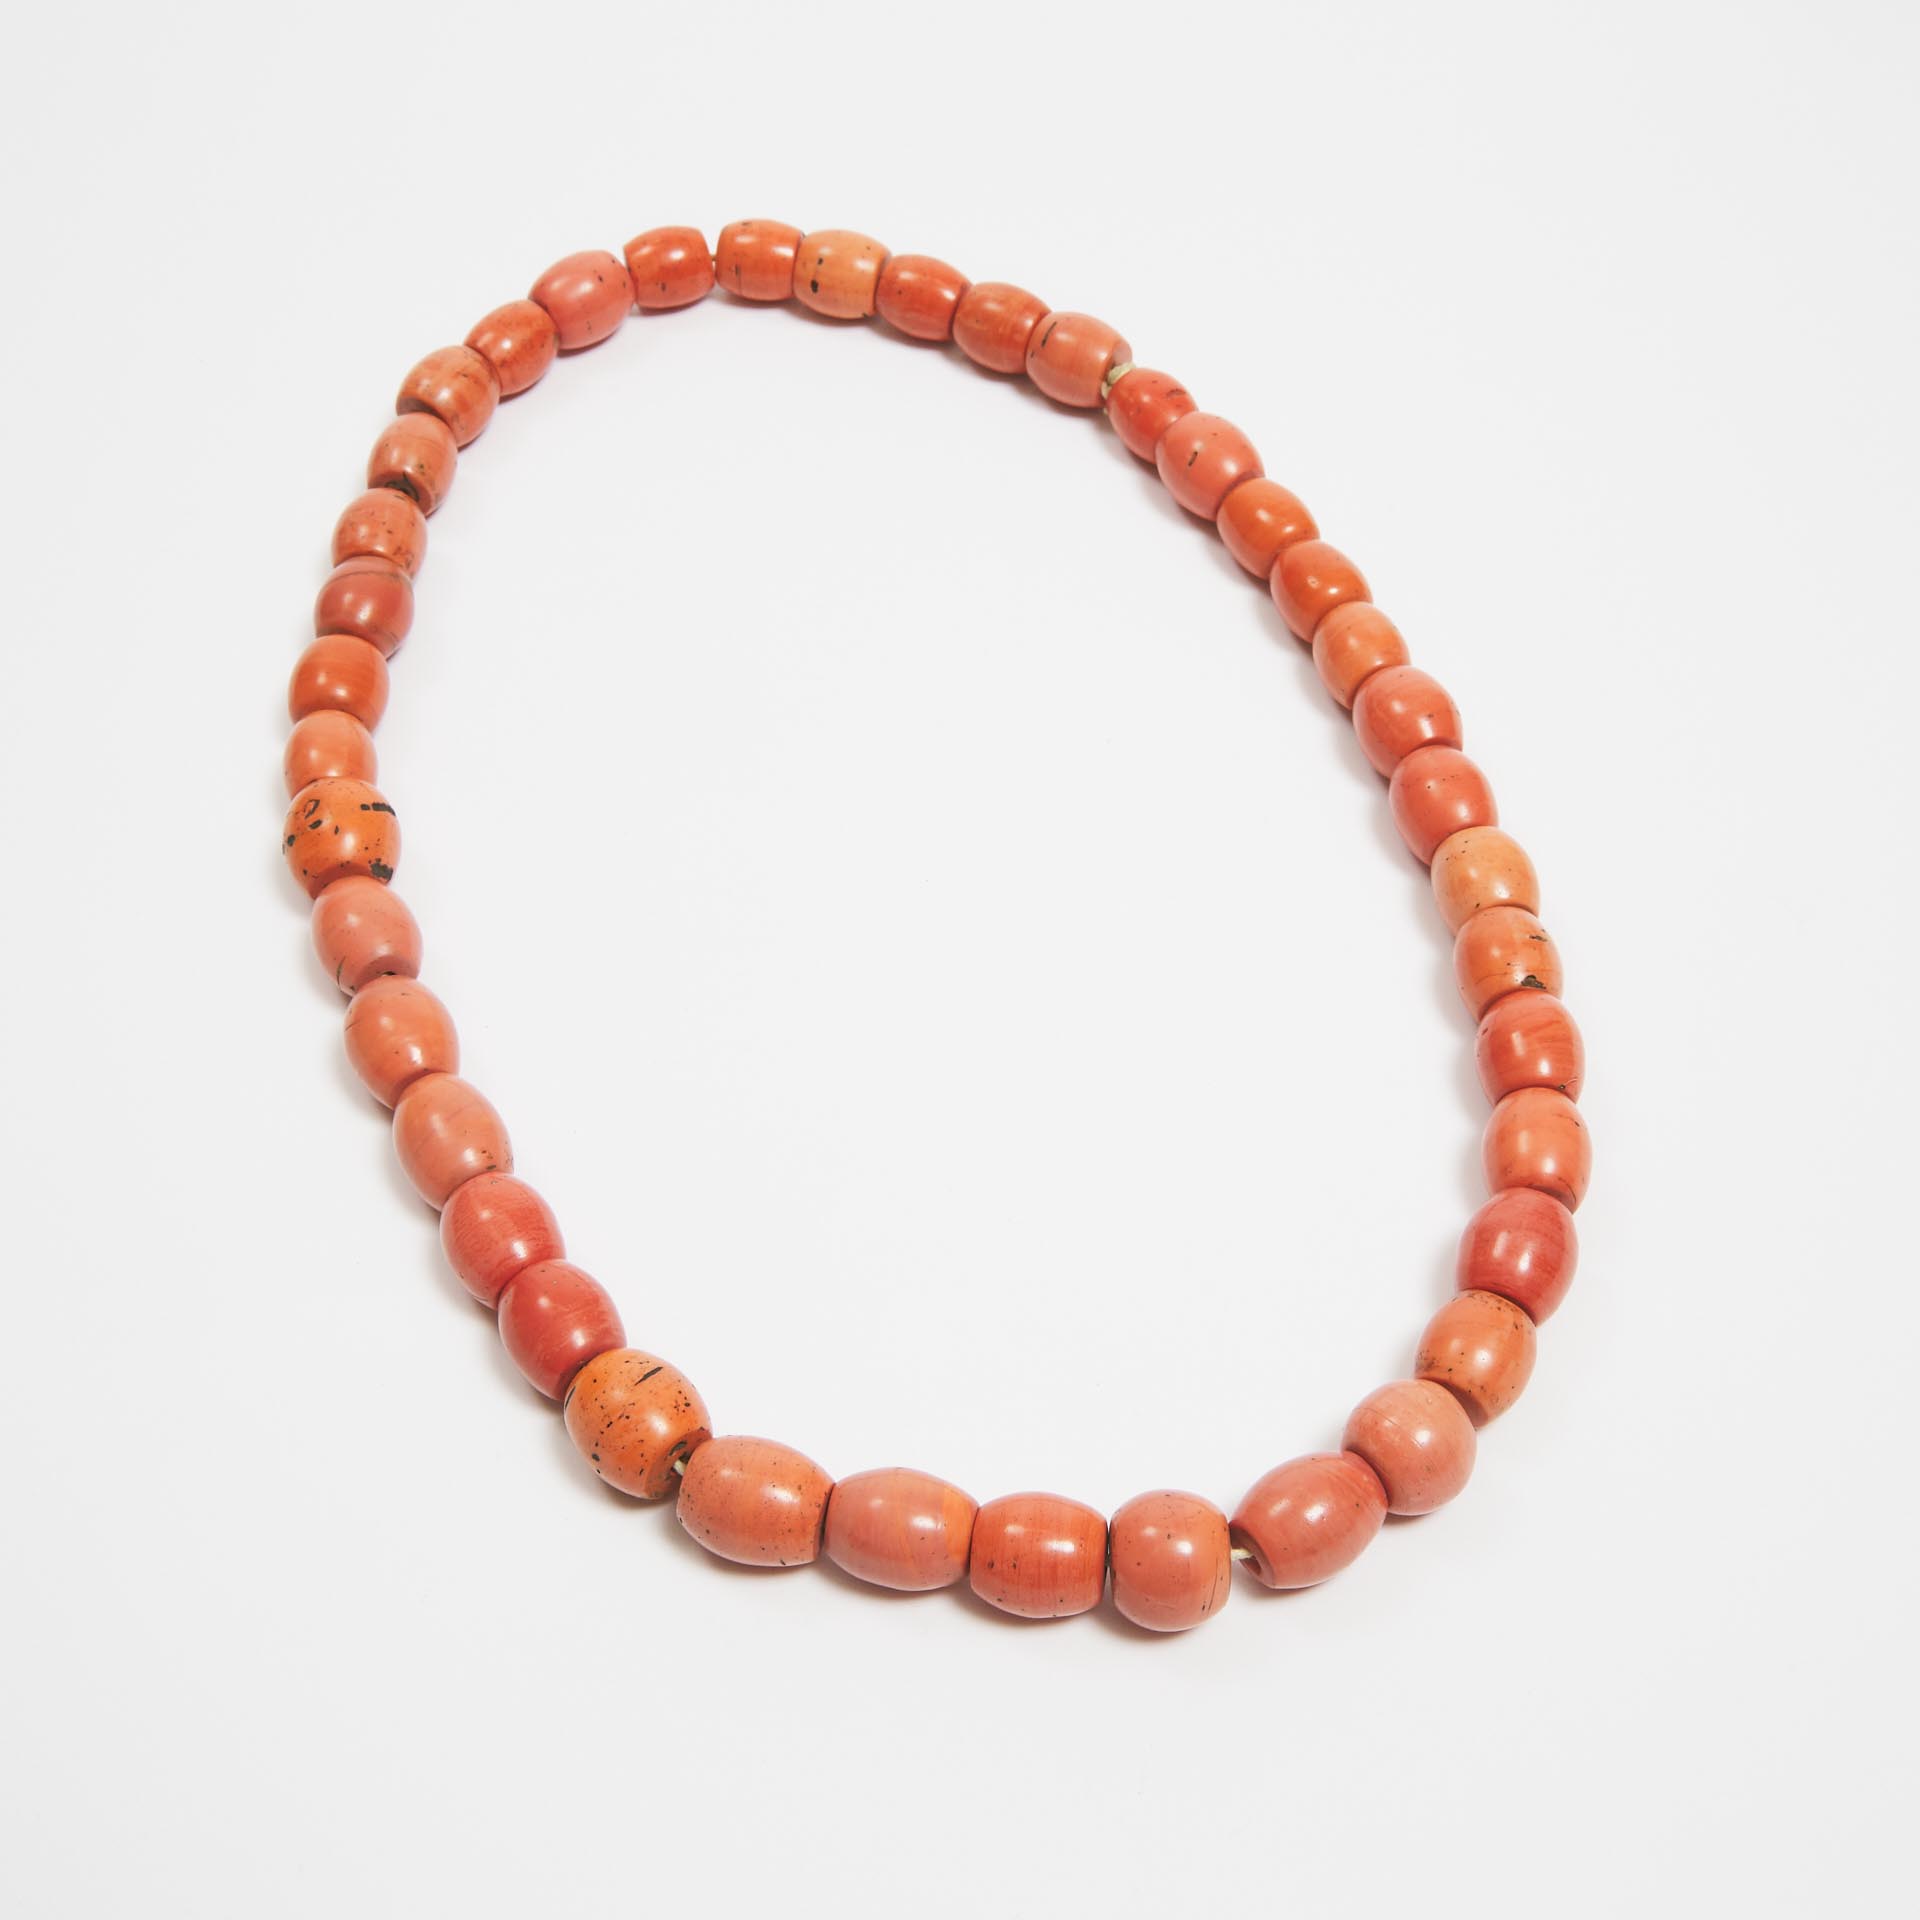 A Necklace of Forty Sherpa Imitation-Coral Glass Beads, 19th Century